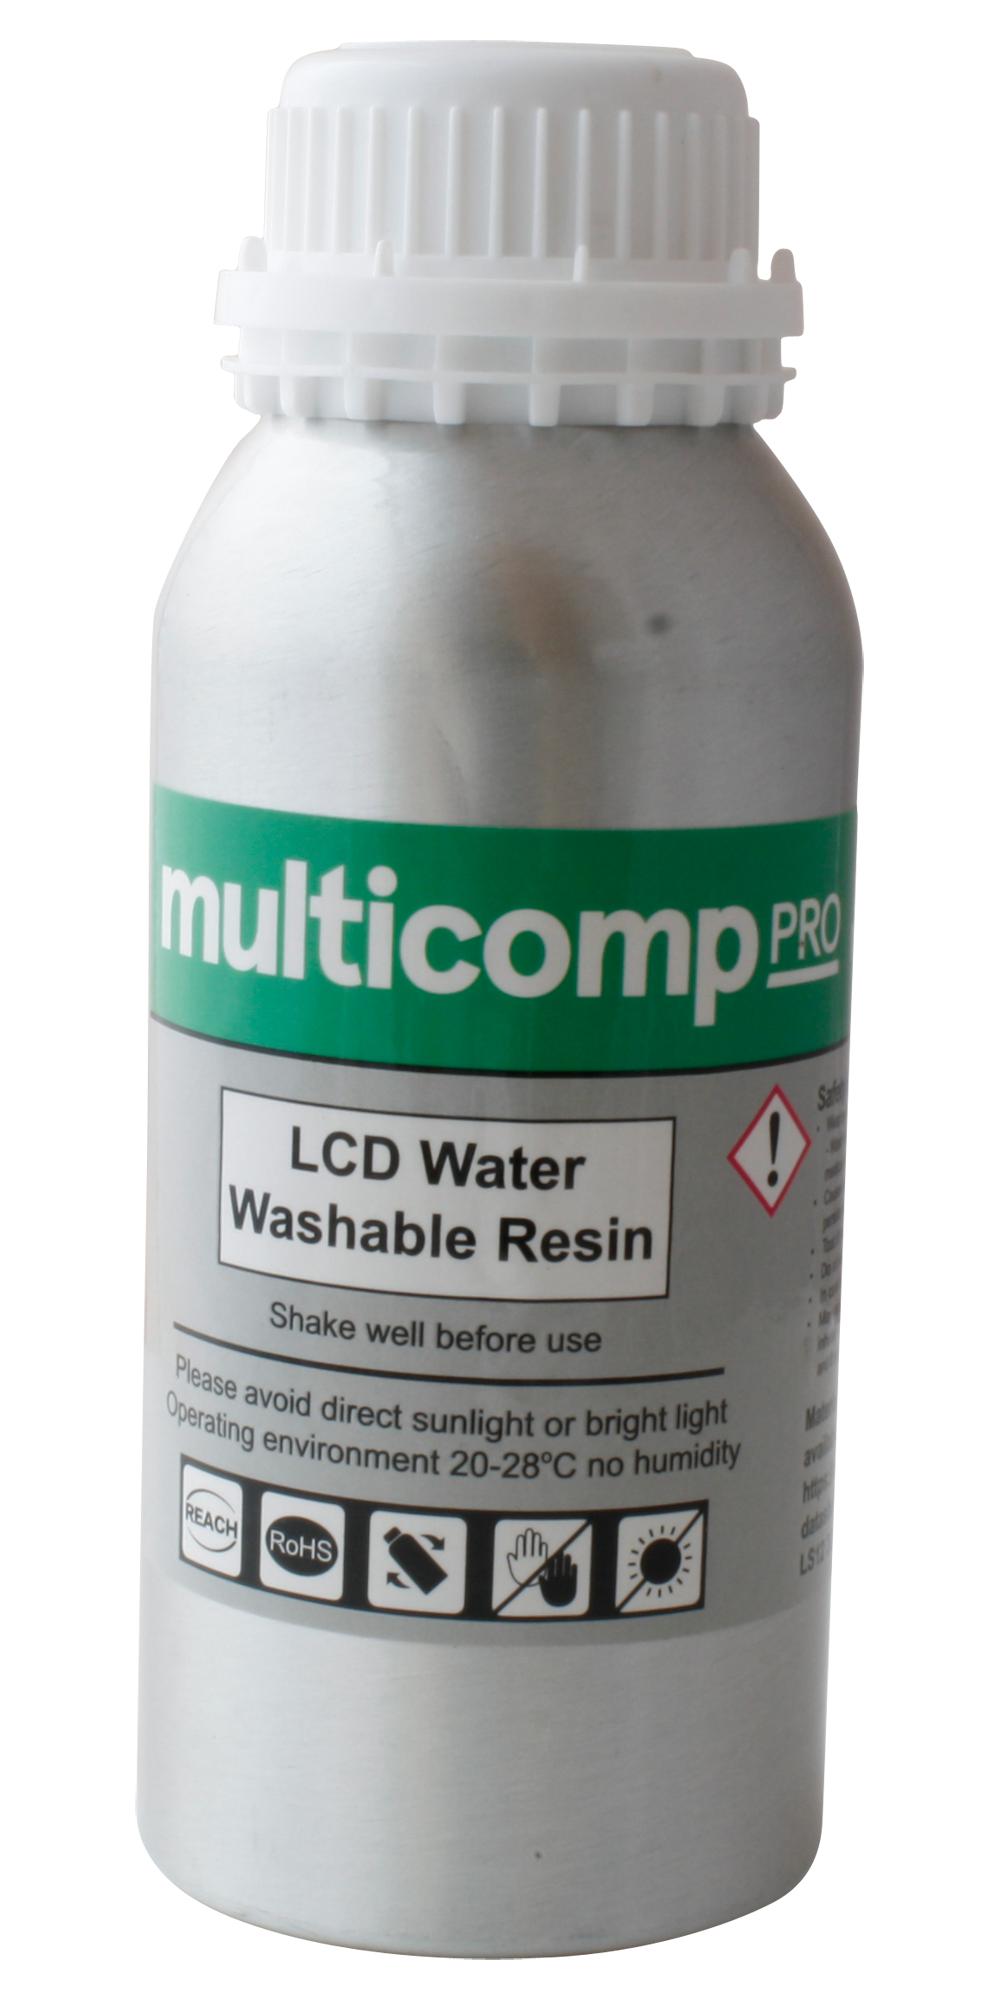 MP004399 LCD WATER WASHABLE RESIN, GREY, 500G MULTICOMP PRO